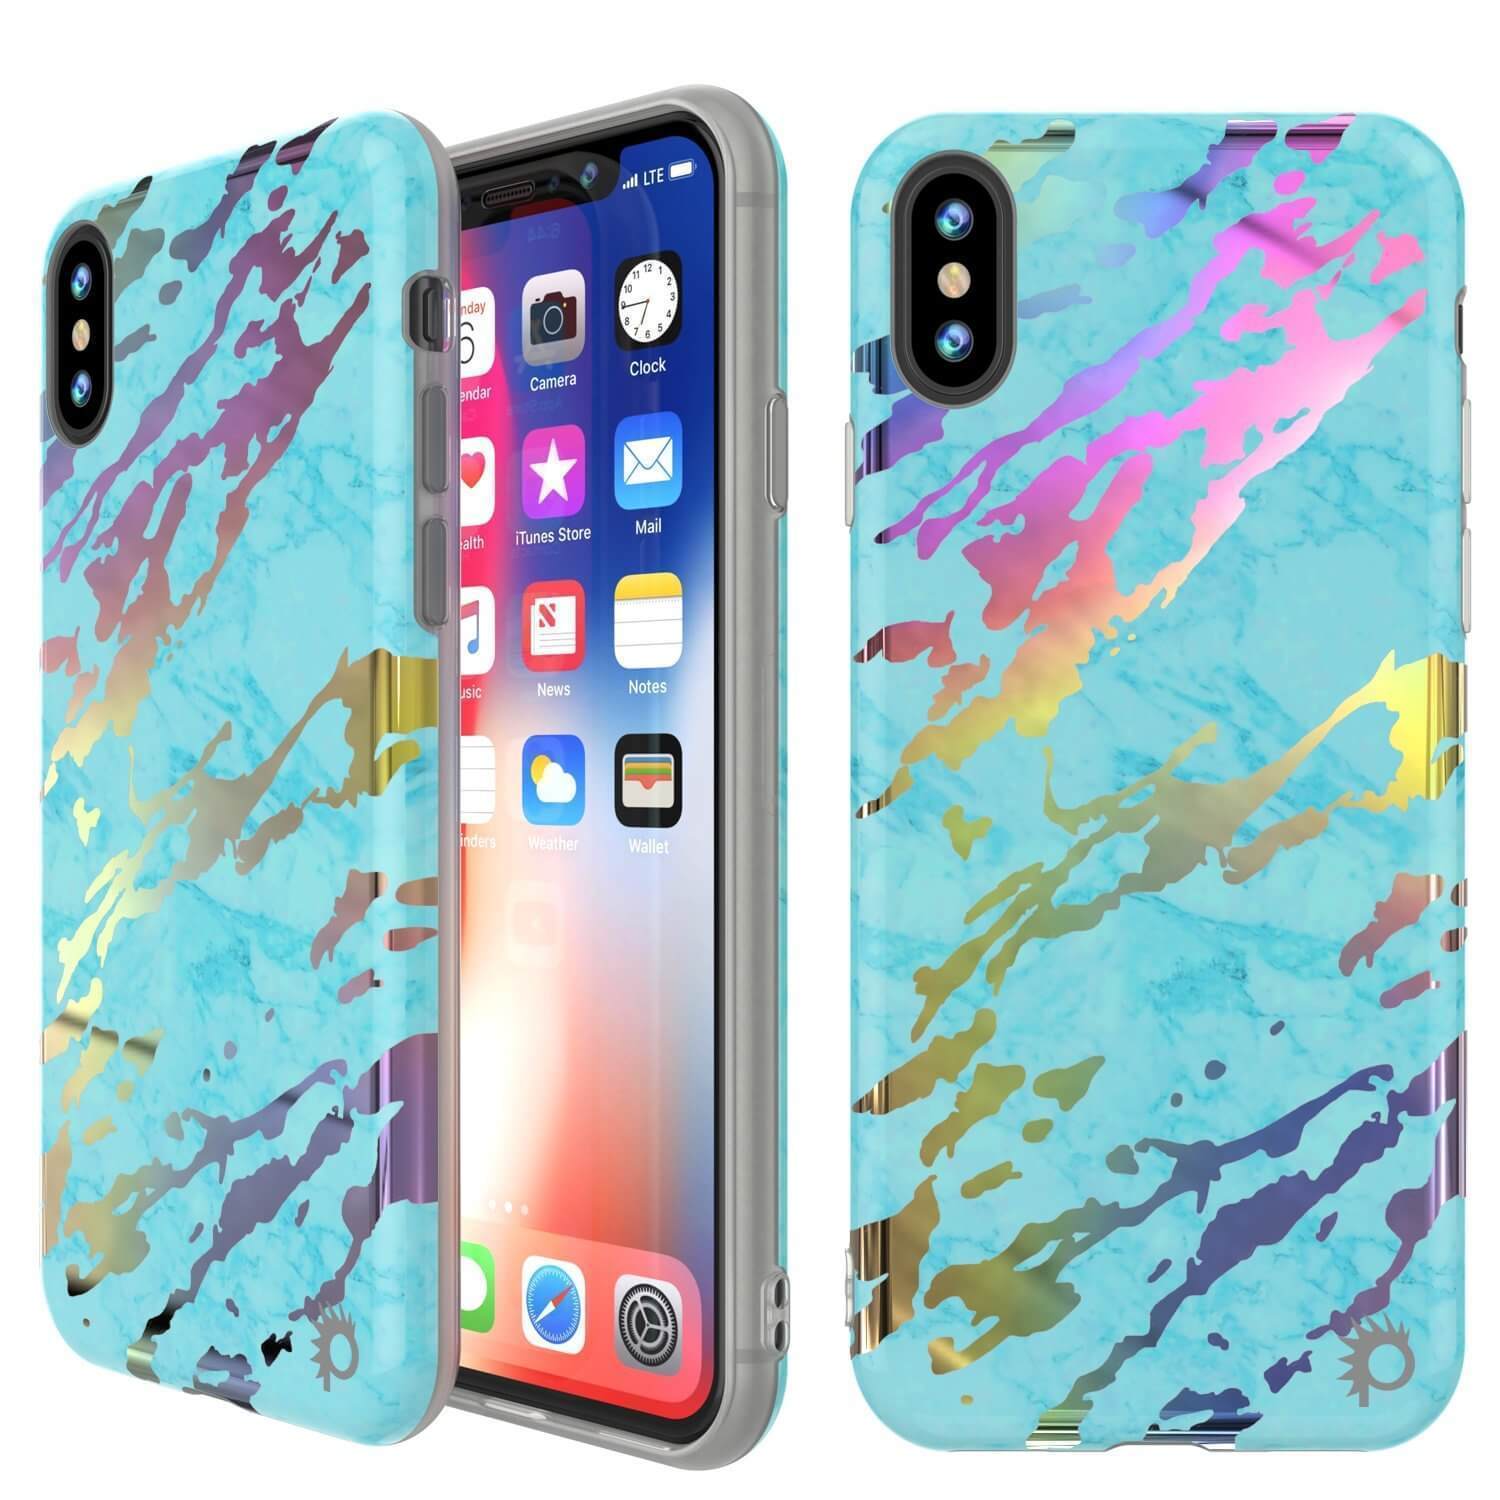 Punkcase iPhone XR Marble Case, Protective Full Body Cover Protector (Teal Onyx)